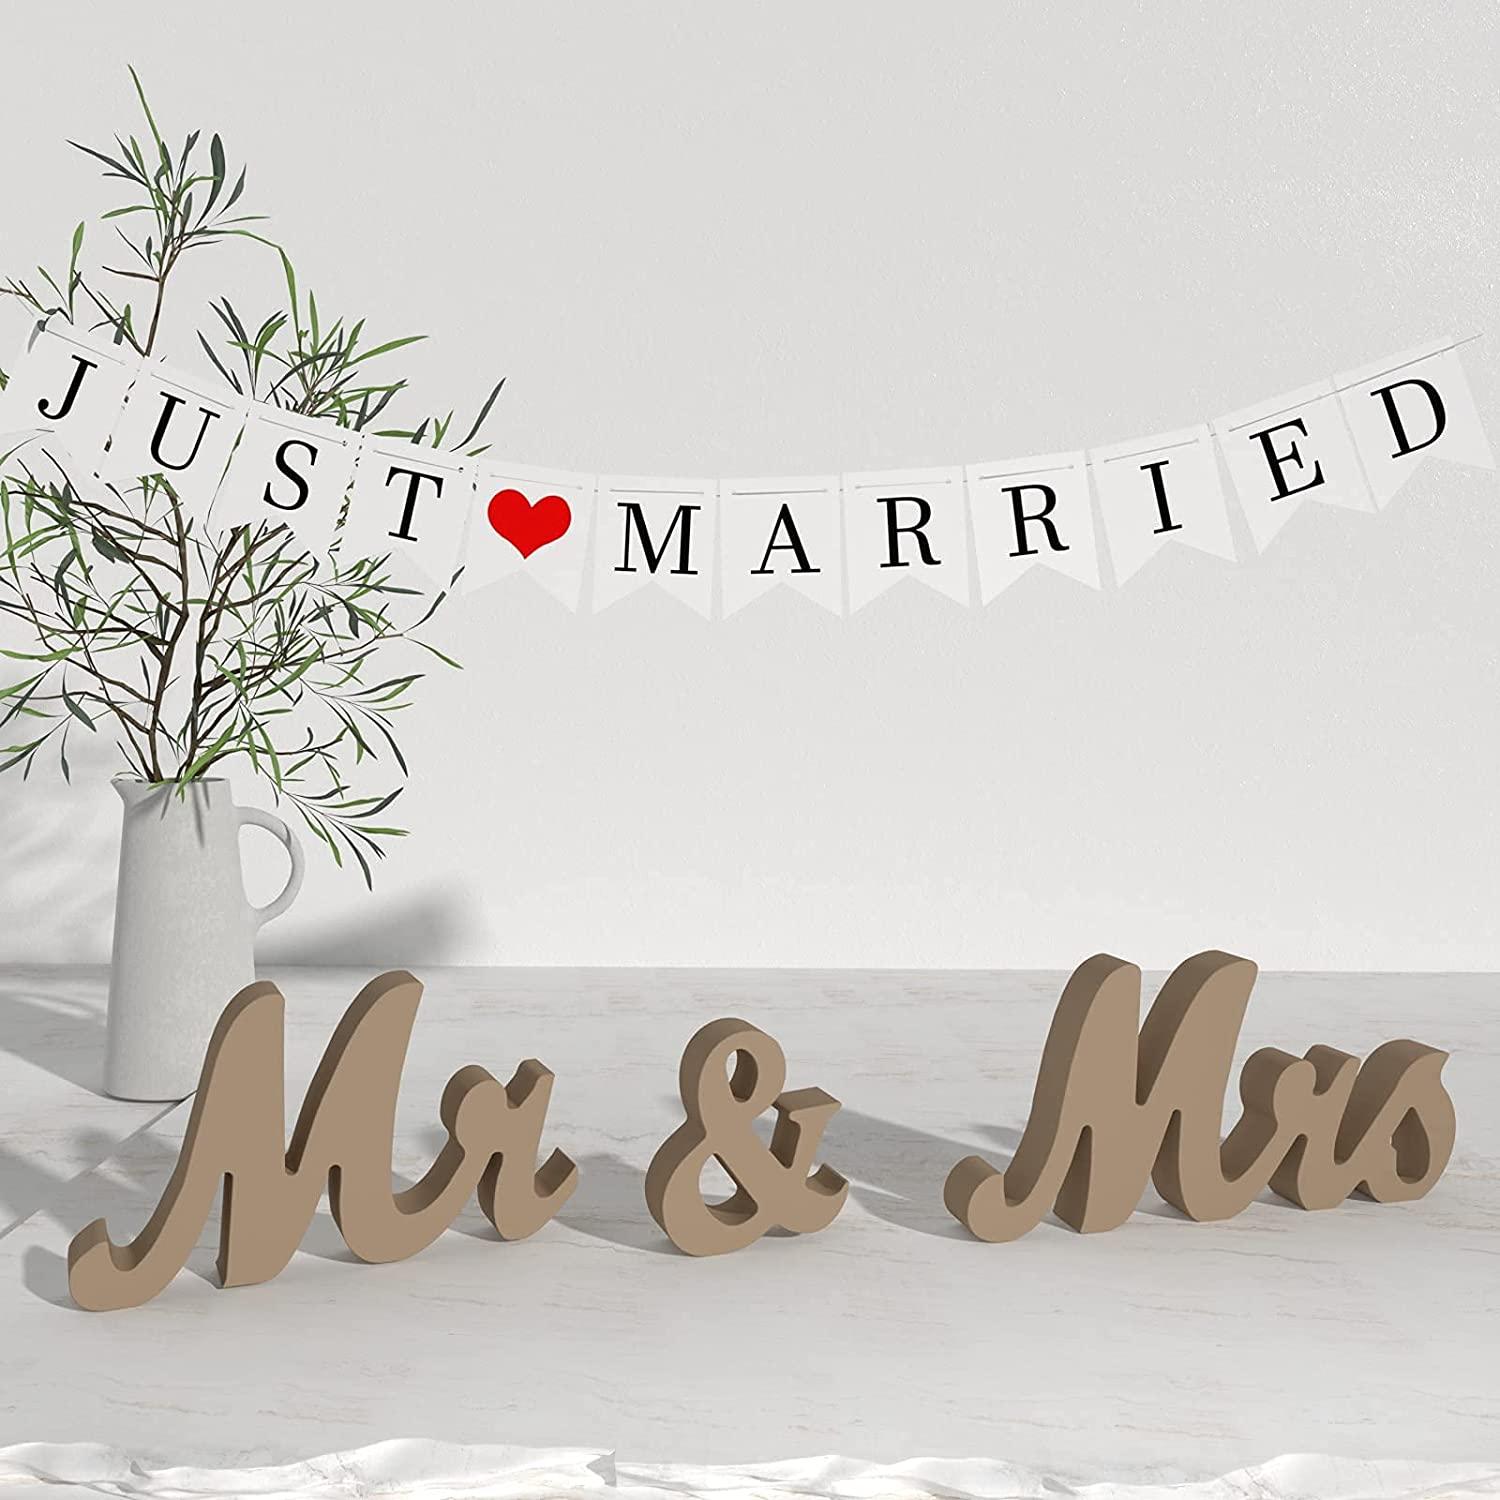 Wedding Decorations Set,Large Mr and Mrs Sign & Just Married Banner - If you say i do